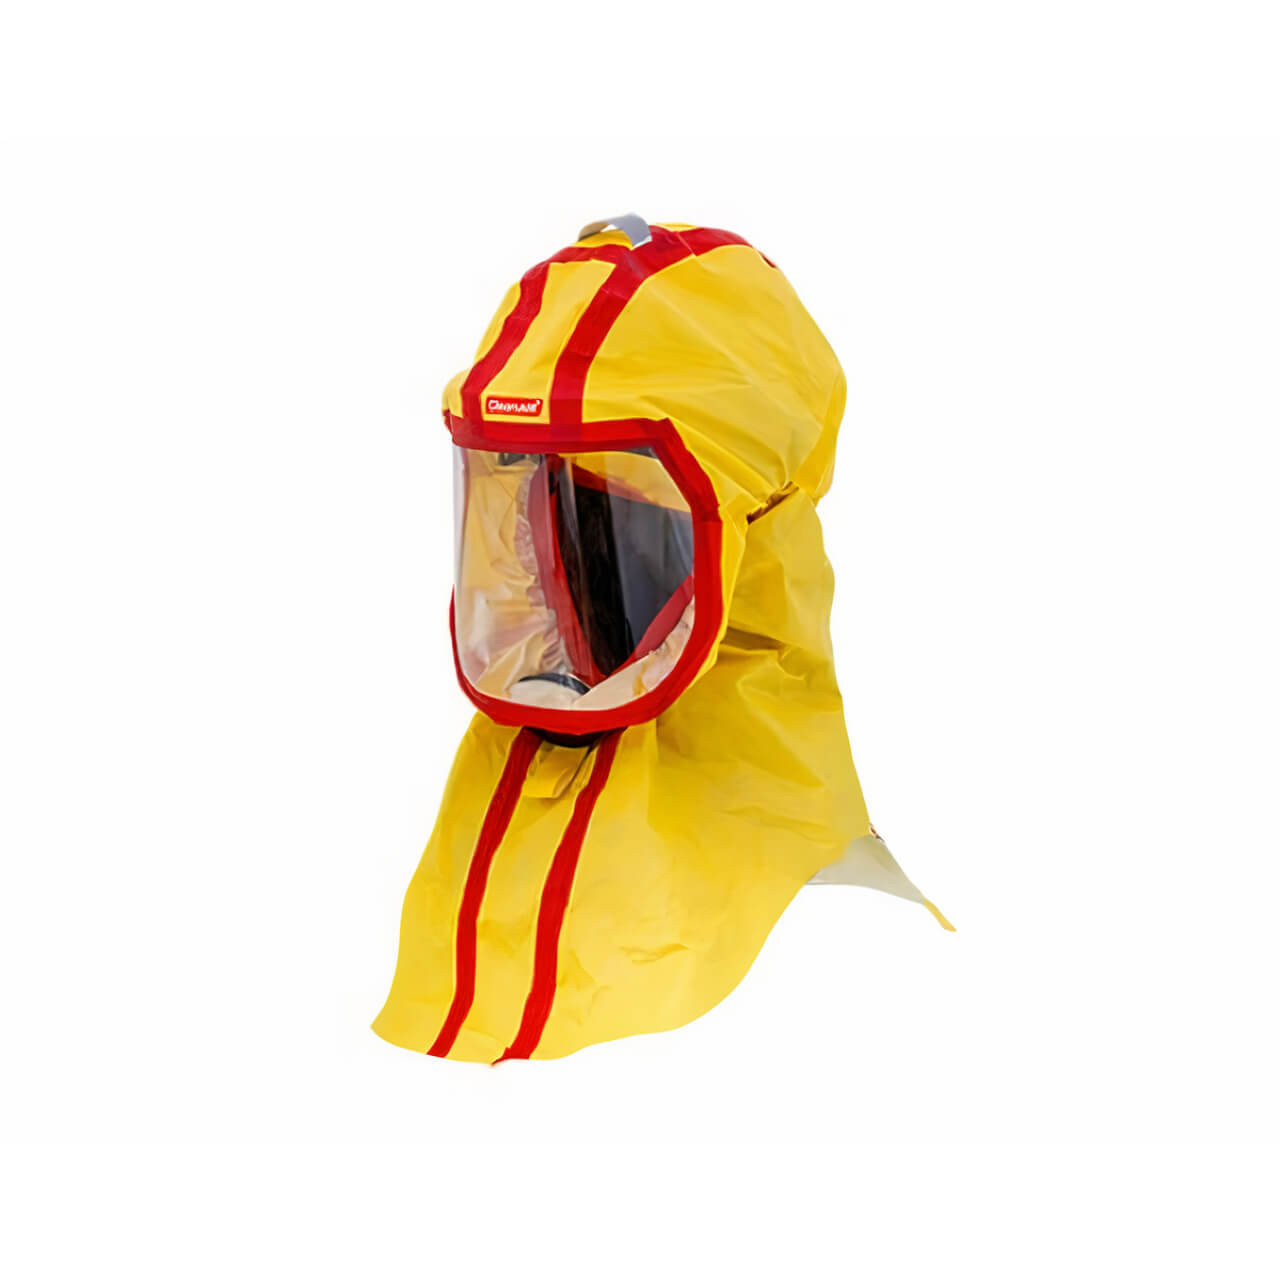 Cleanair CA-10 Long Protective Chemical Resistant Hood